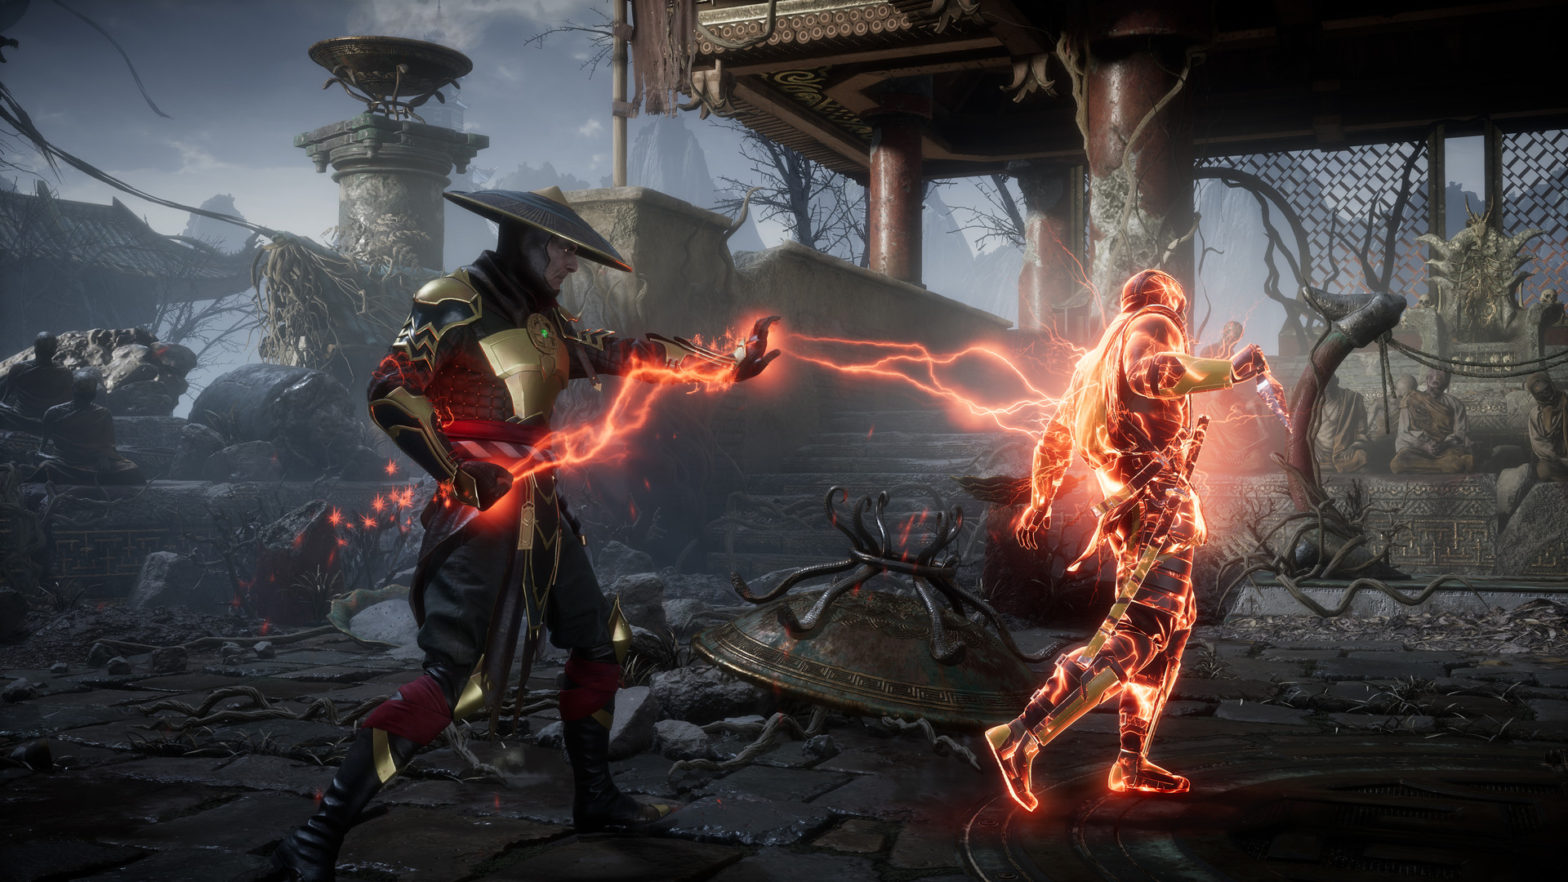 Mortal Kombat 2 Release Date Rumors: When is it Coming Out?